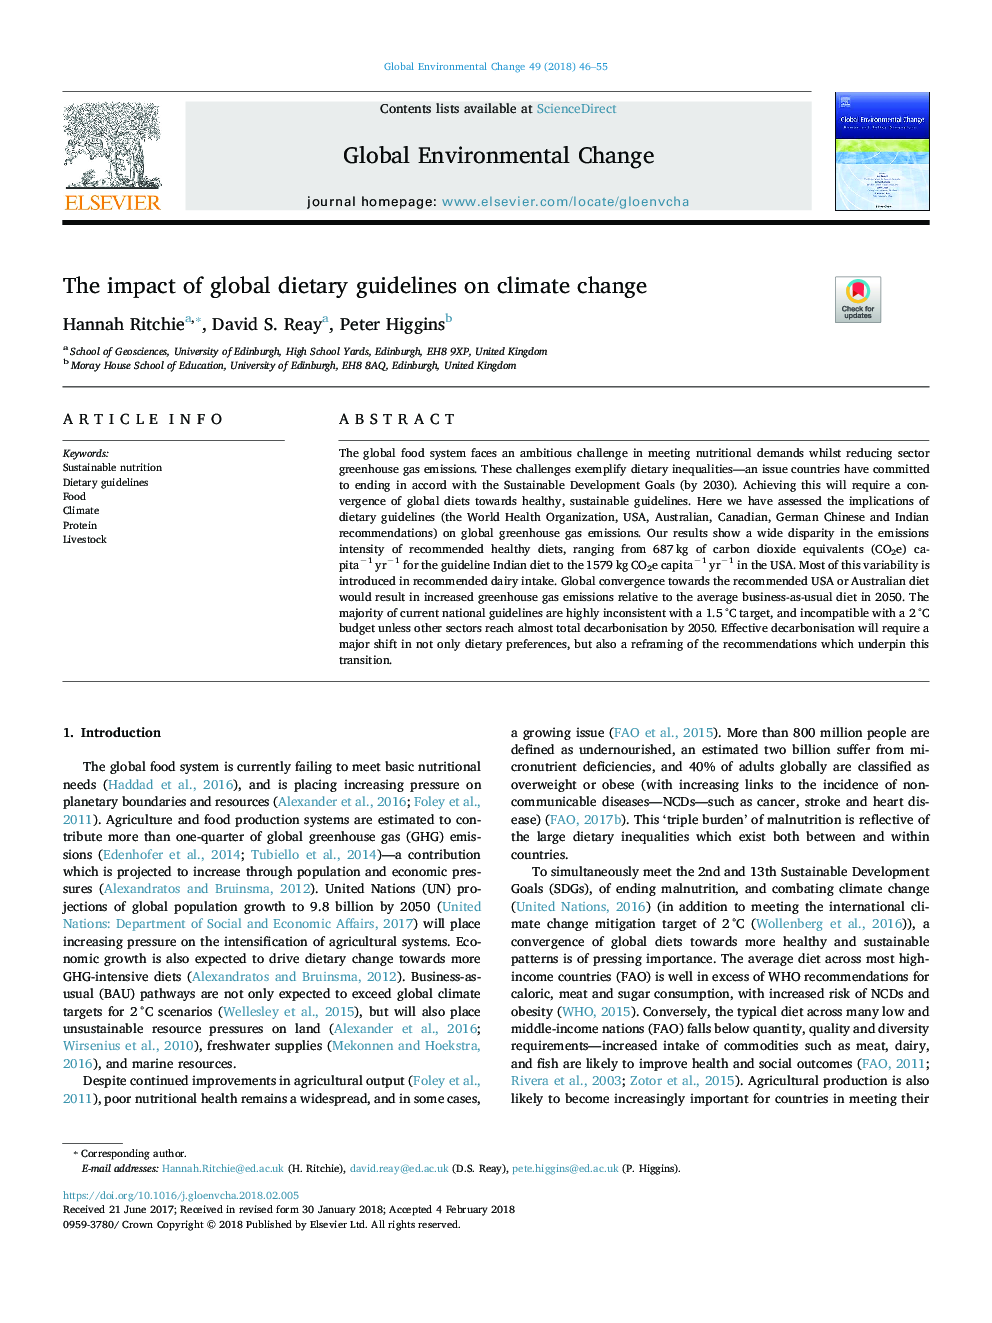 The impact of global dietary guidelines on climate change